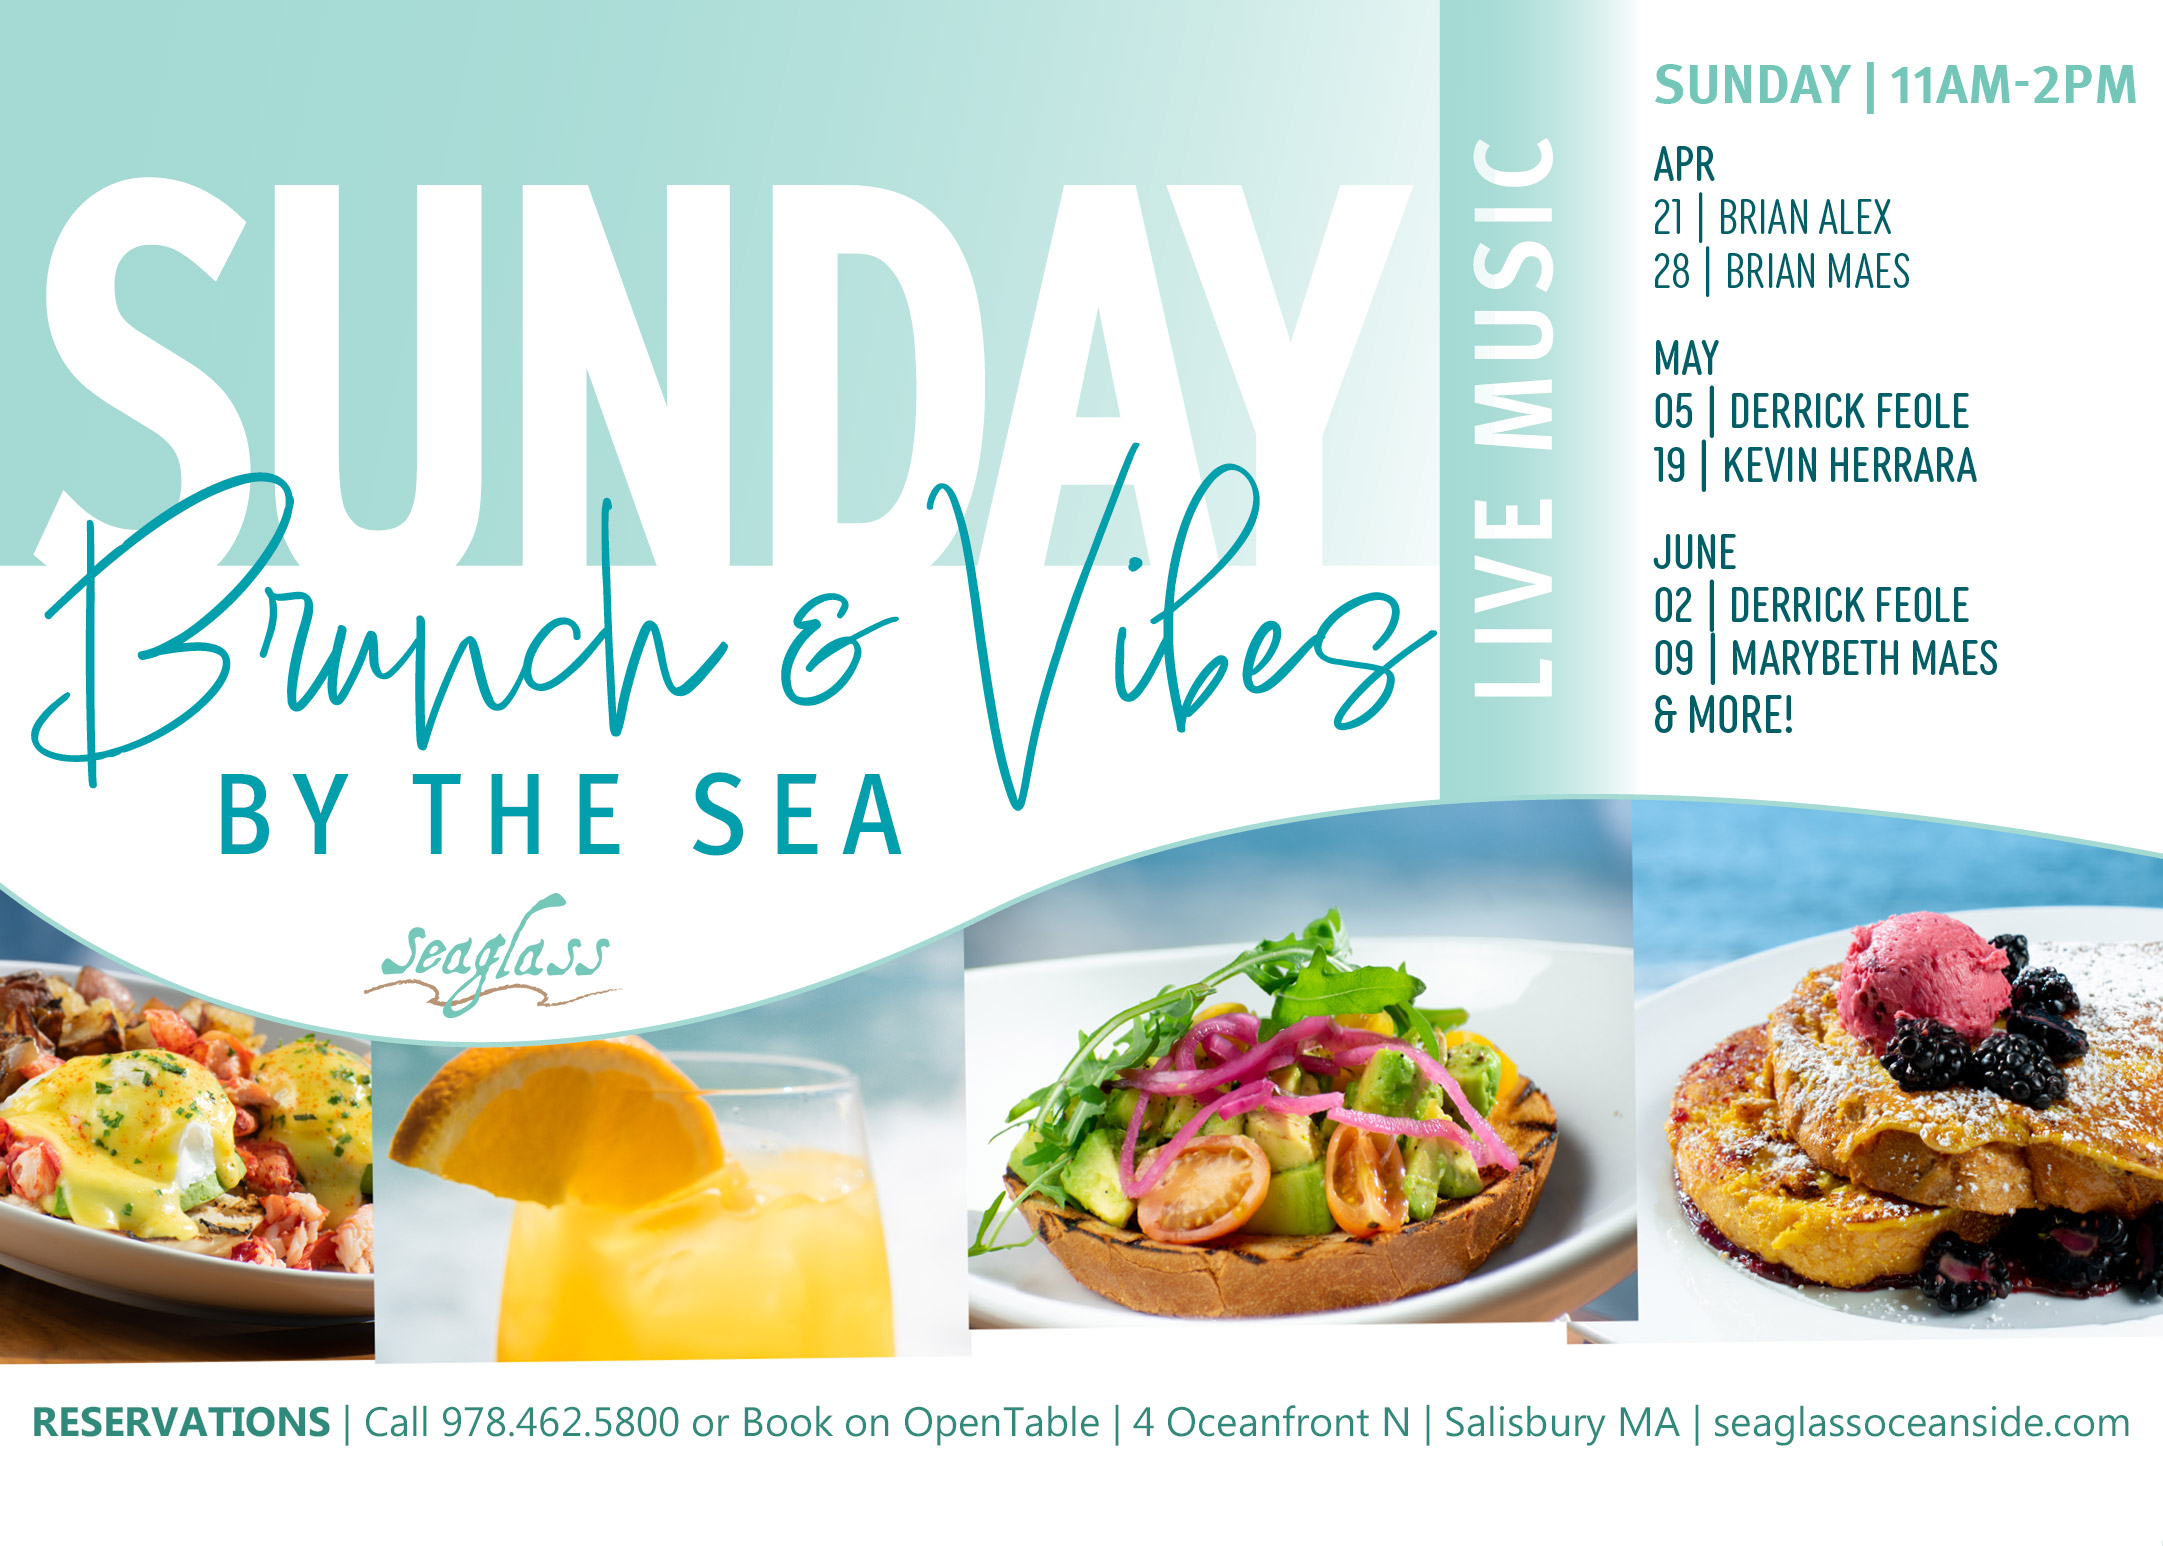 Sunday Brunch & Vibes at Seaglass